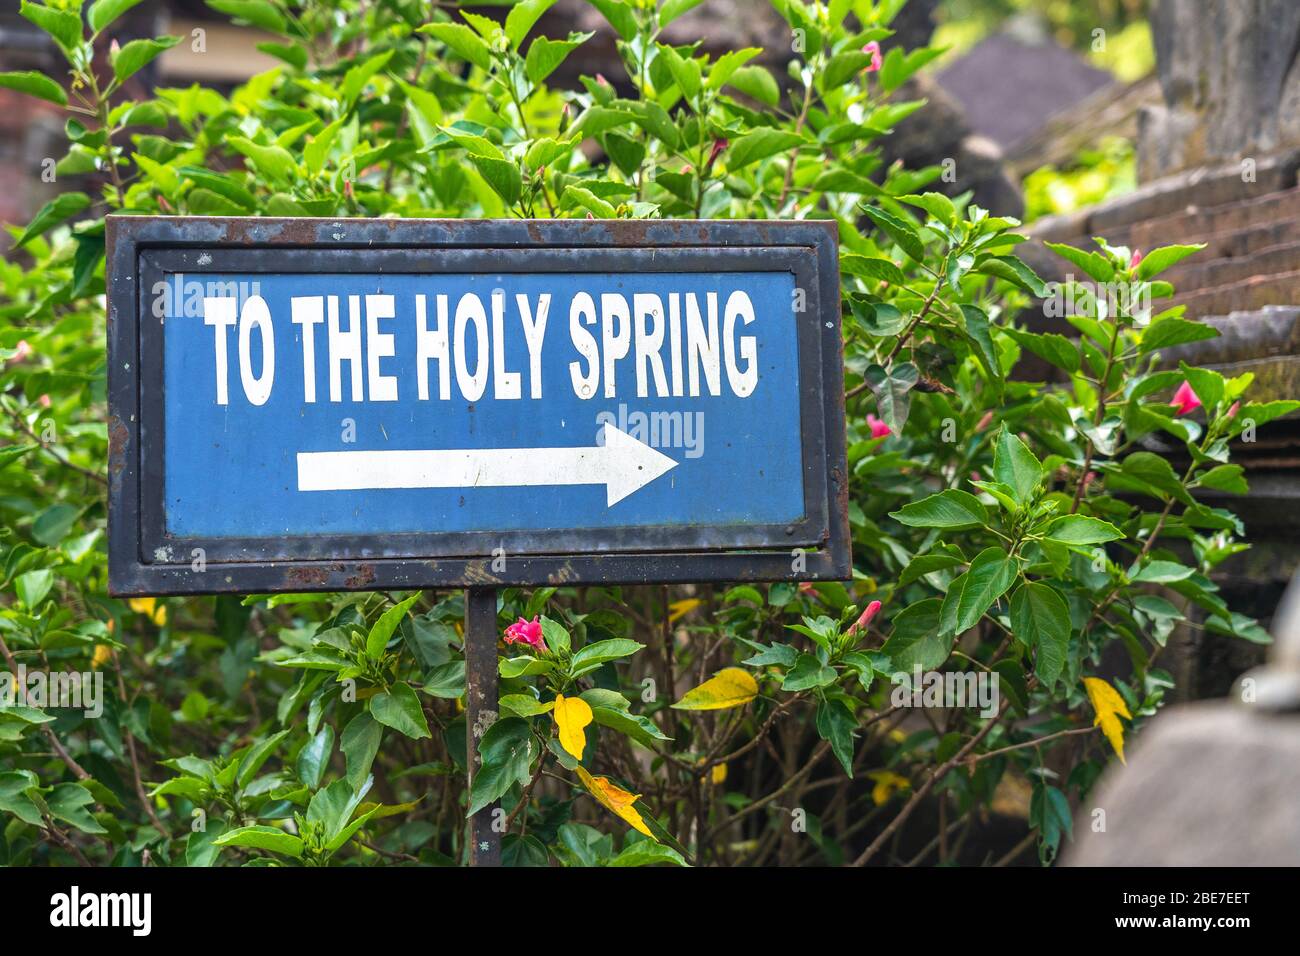 To the holy spring sign at Tirta Empul Holy Water Temple, Bali - Indonesia Stock Photo